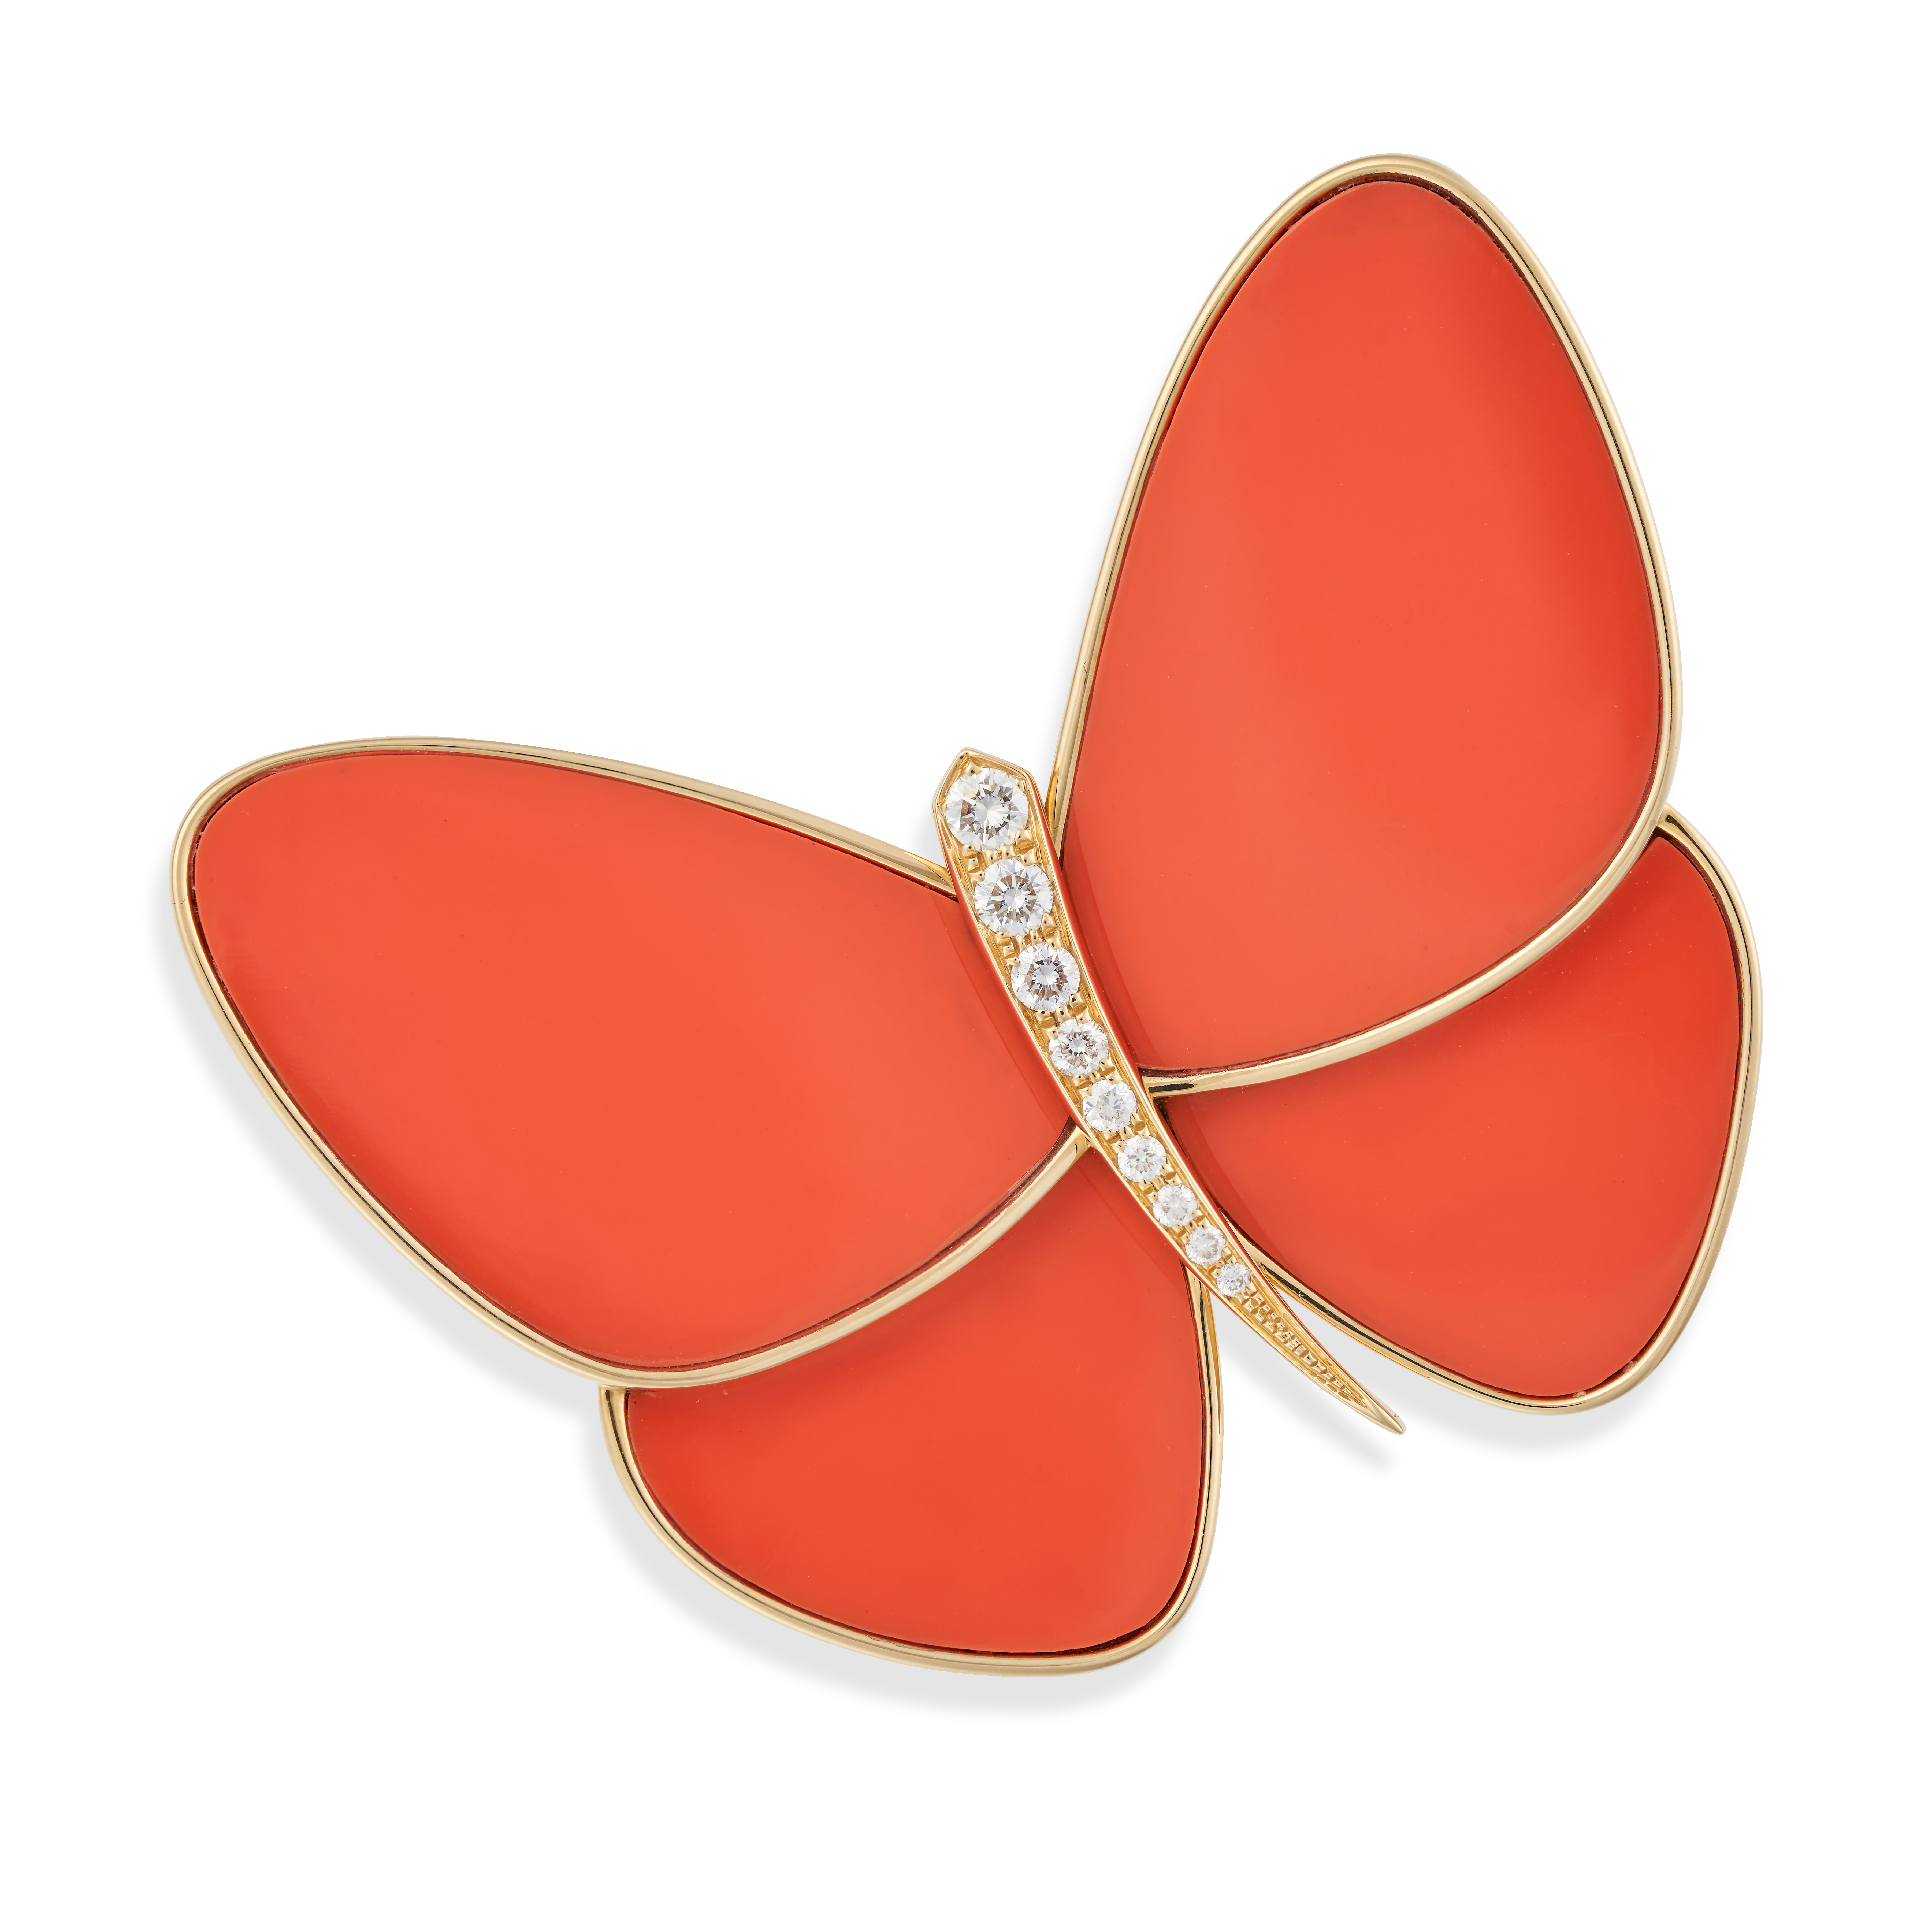 VAN CLEEF & ARPELS, A CORAL AND DIAMOND BUTTERFLY BROOCH designed as a butterfly set with a row o...